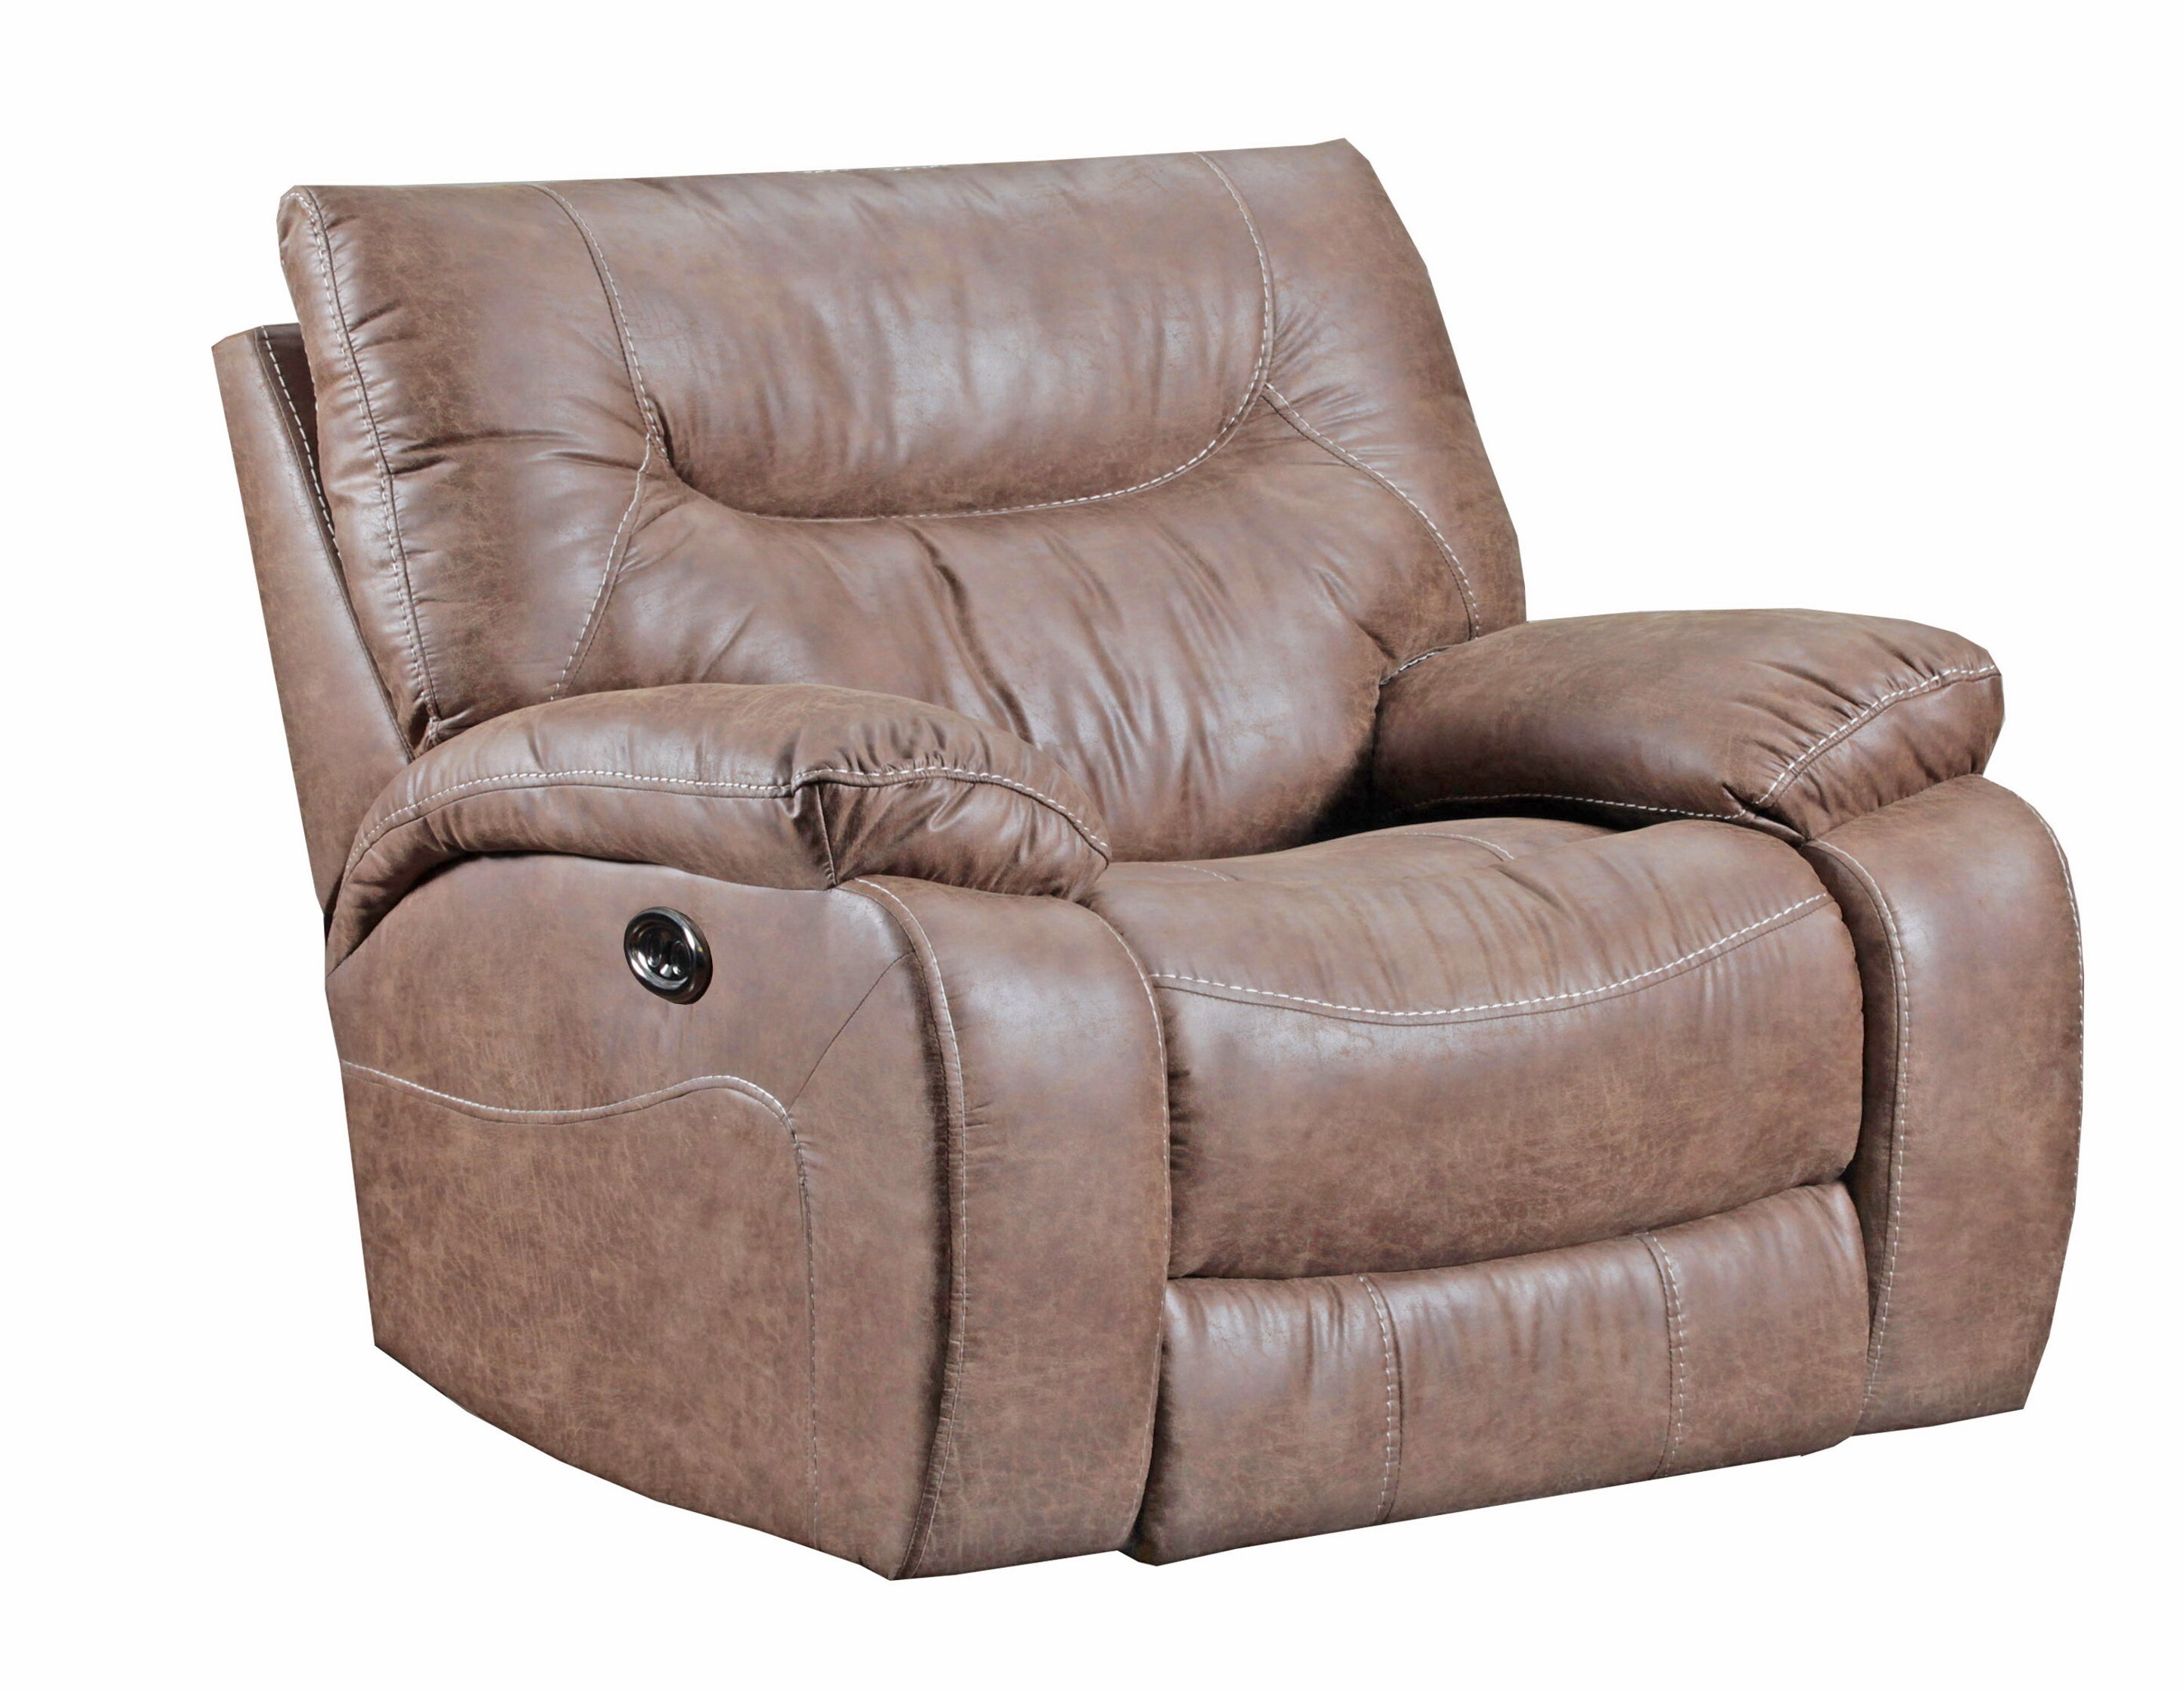 Chair And A Half Recliner At American Frieght | Recliner Chair